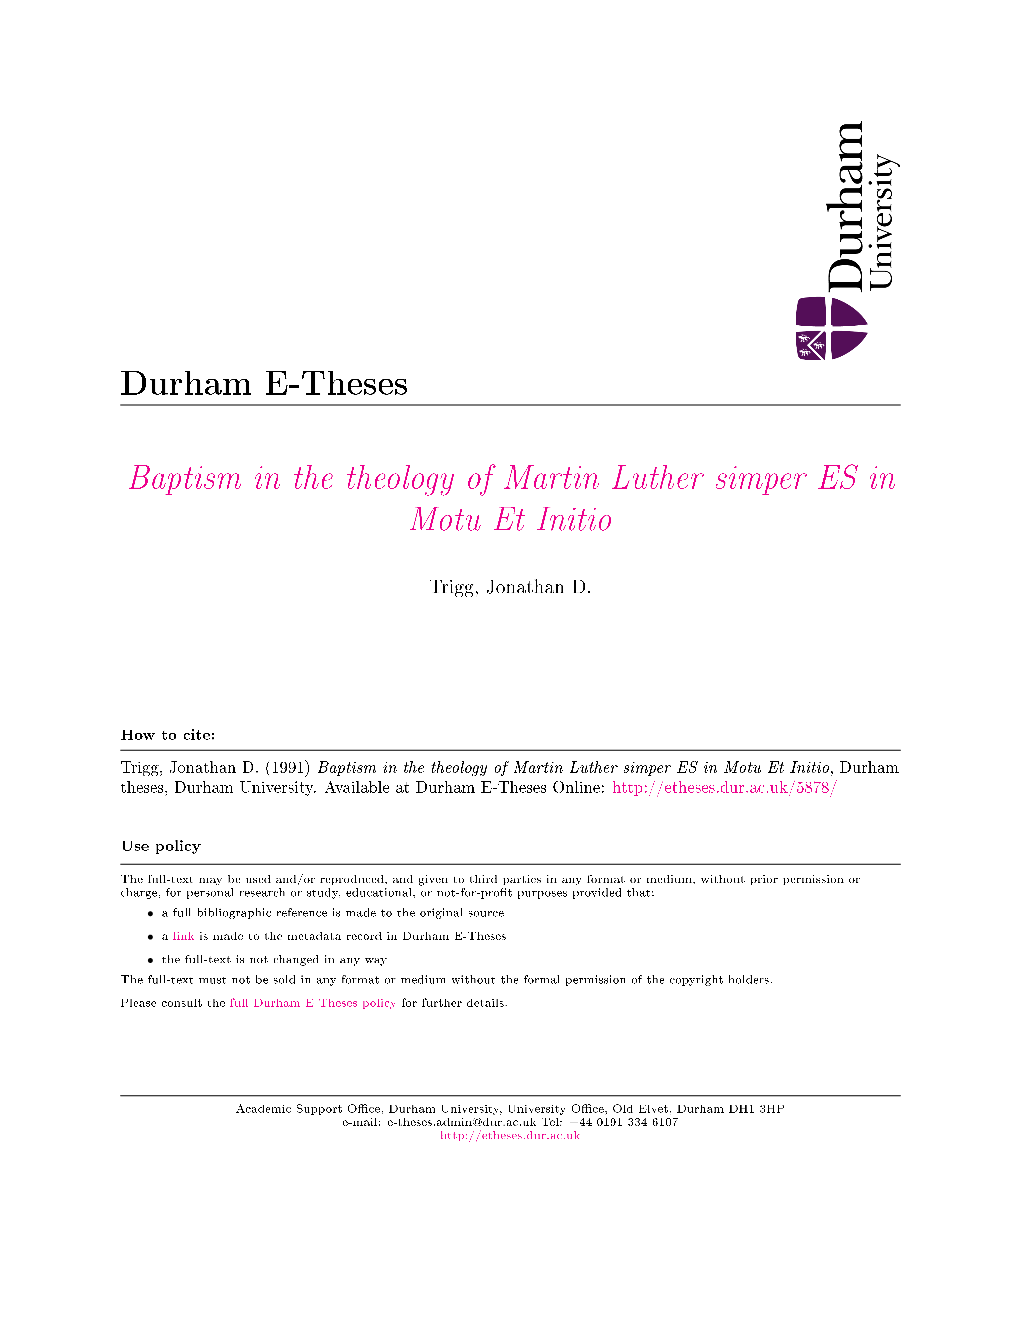 Baptism in the Theology of Martin Luther Simper ES in Motu Et Initio